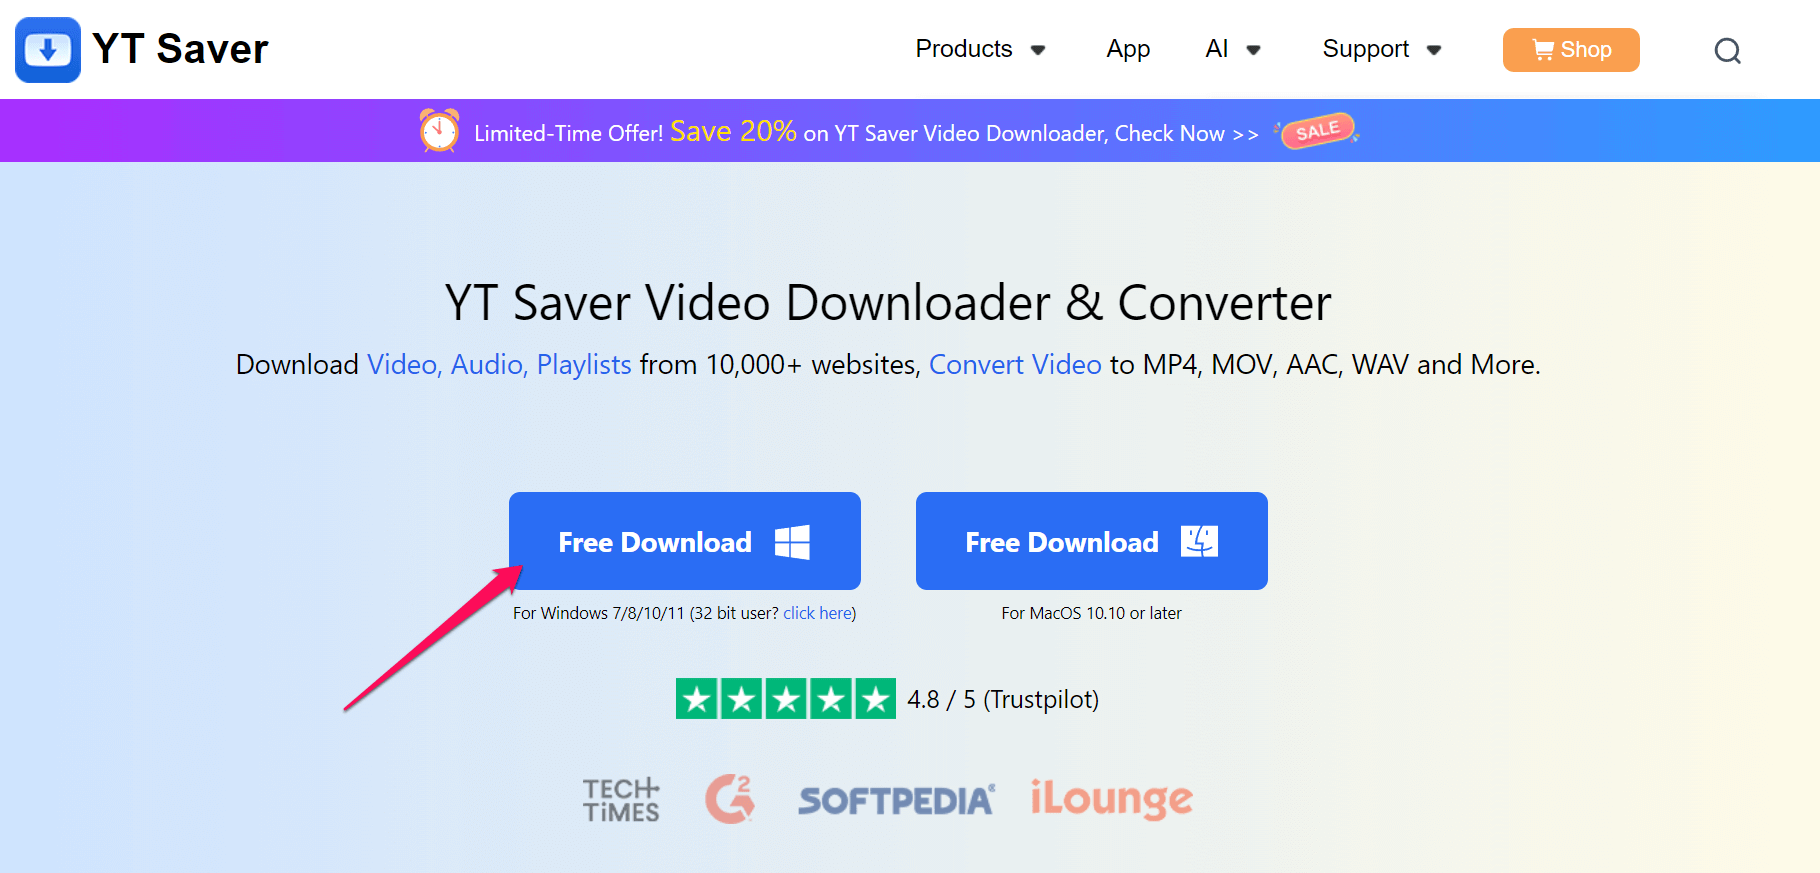 YT Saver app download page